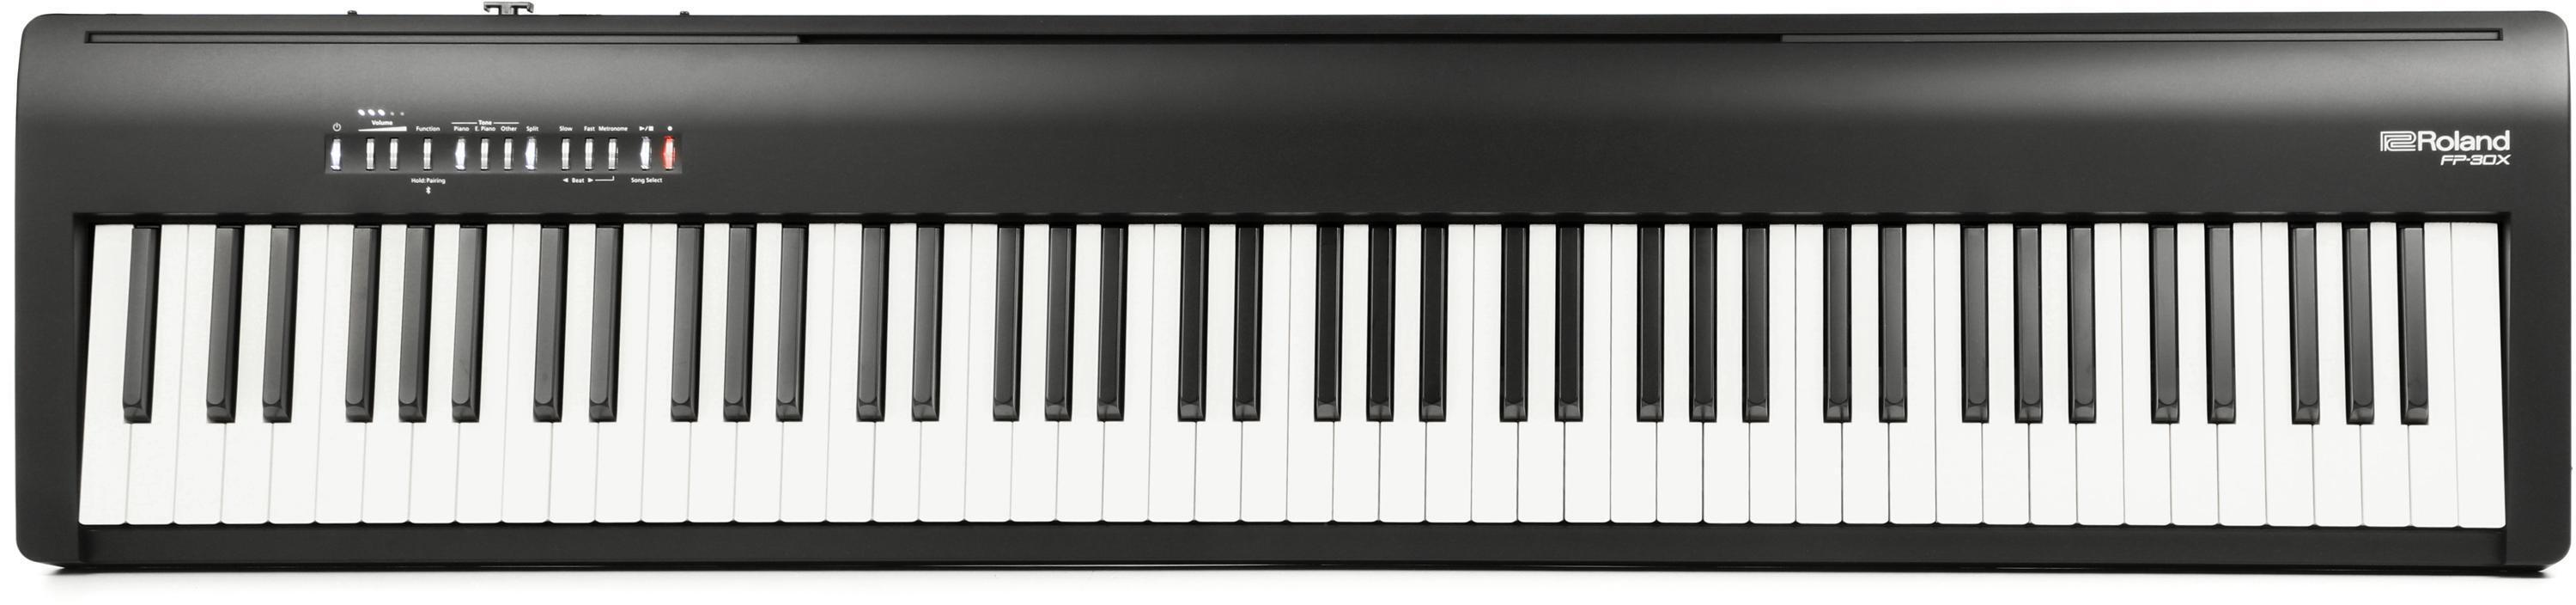 Roland FP-30X Digital Piano with Speakers - Black | Sweetwater